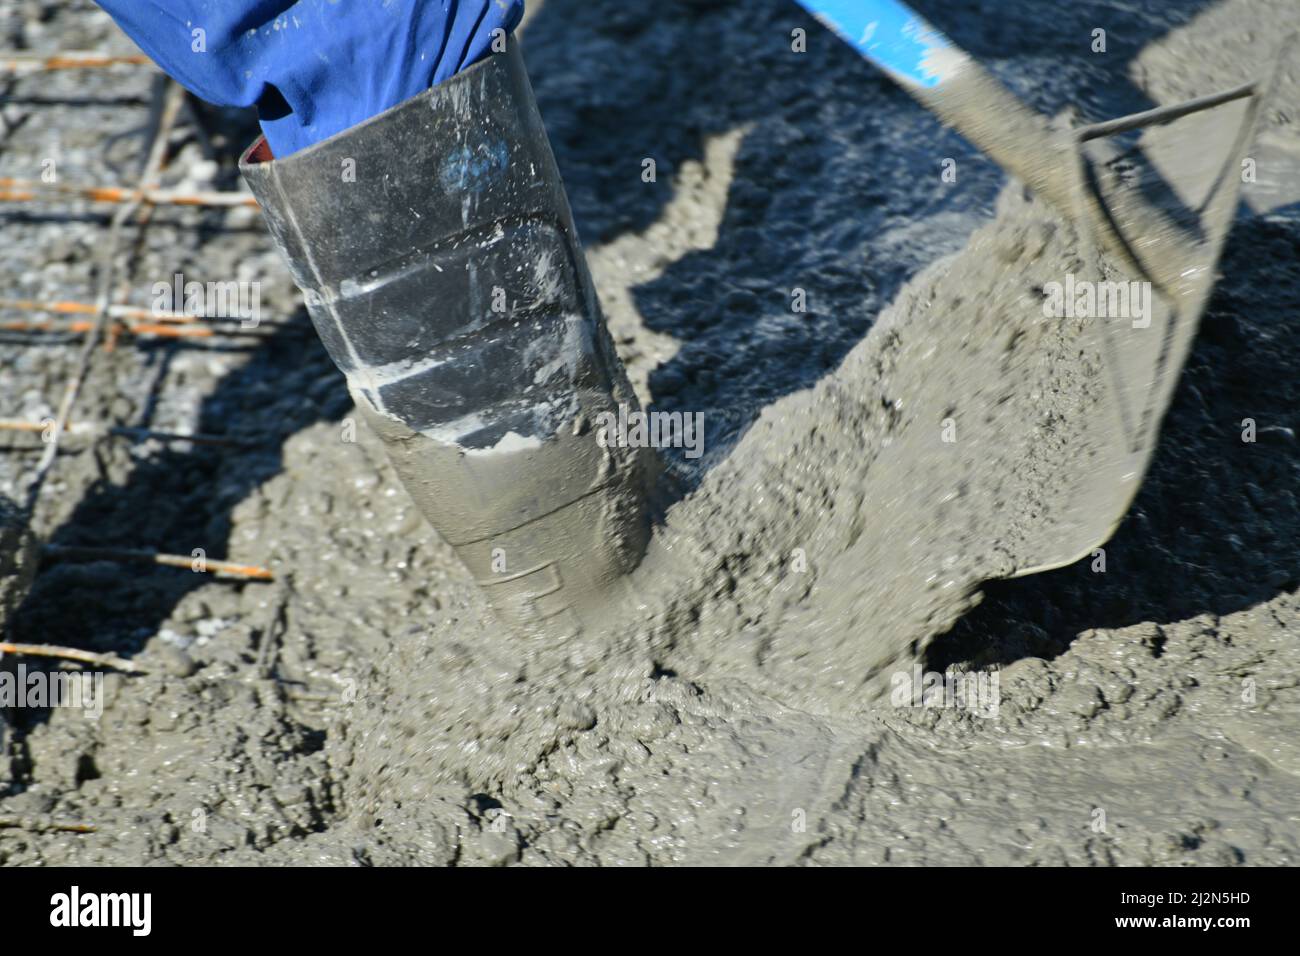 A builder stands ankle deep in wet cement while shifting cement during a concrete pour Stock Photo